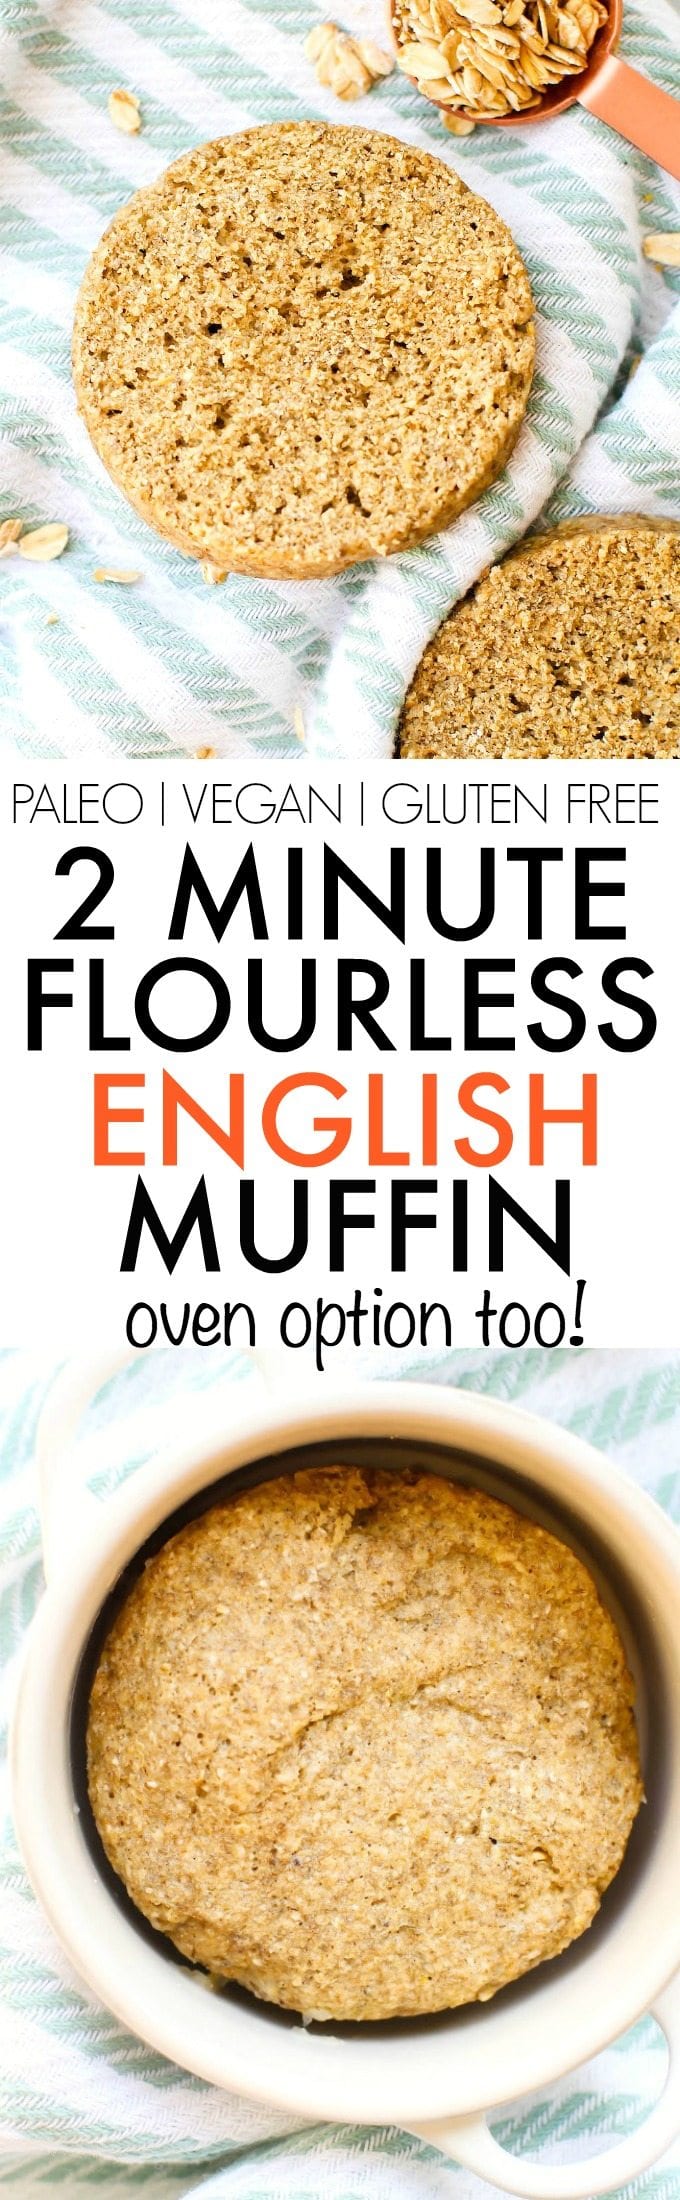 TWO Minute Flourless English Muffin- Perfect toasted and a bread alternative, these crispy, chewy and tender English muffins are completely yeast free and made in a microwave or an oven- There is a grain free option too! {Vegan, gluten free, paleo recipe}- thebigmansworld.com